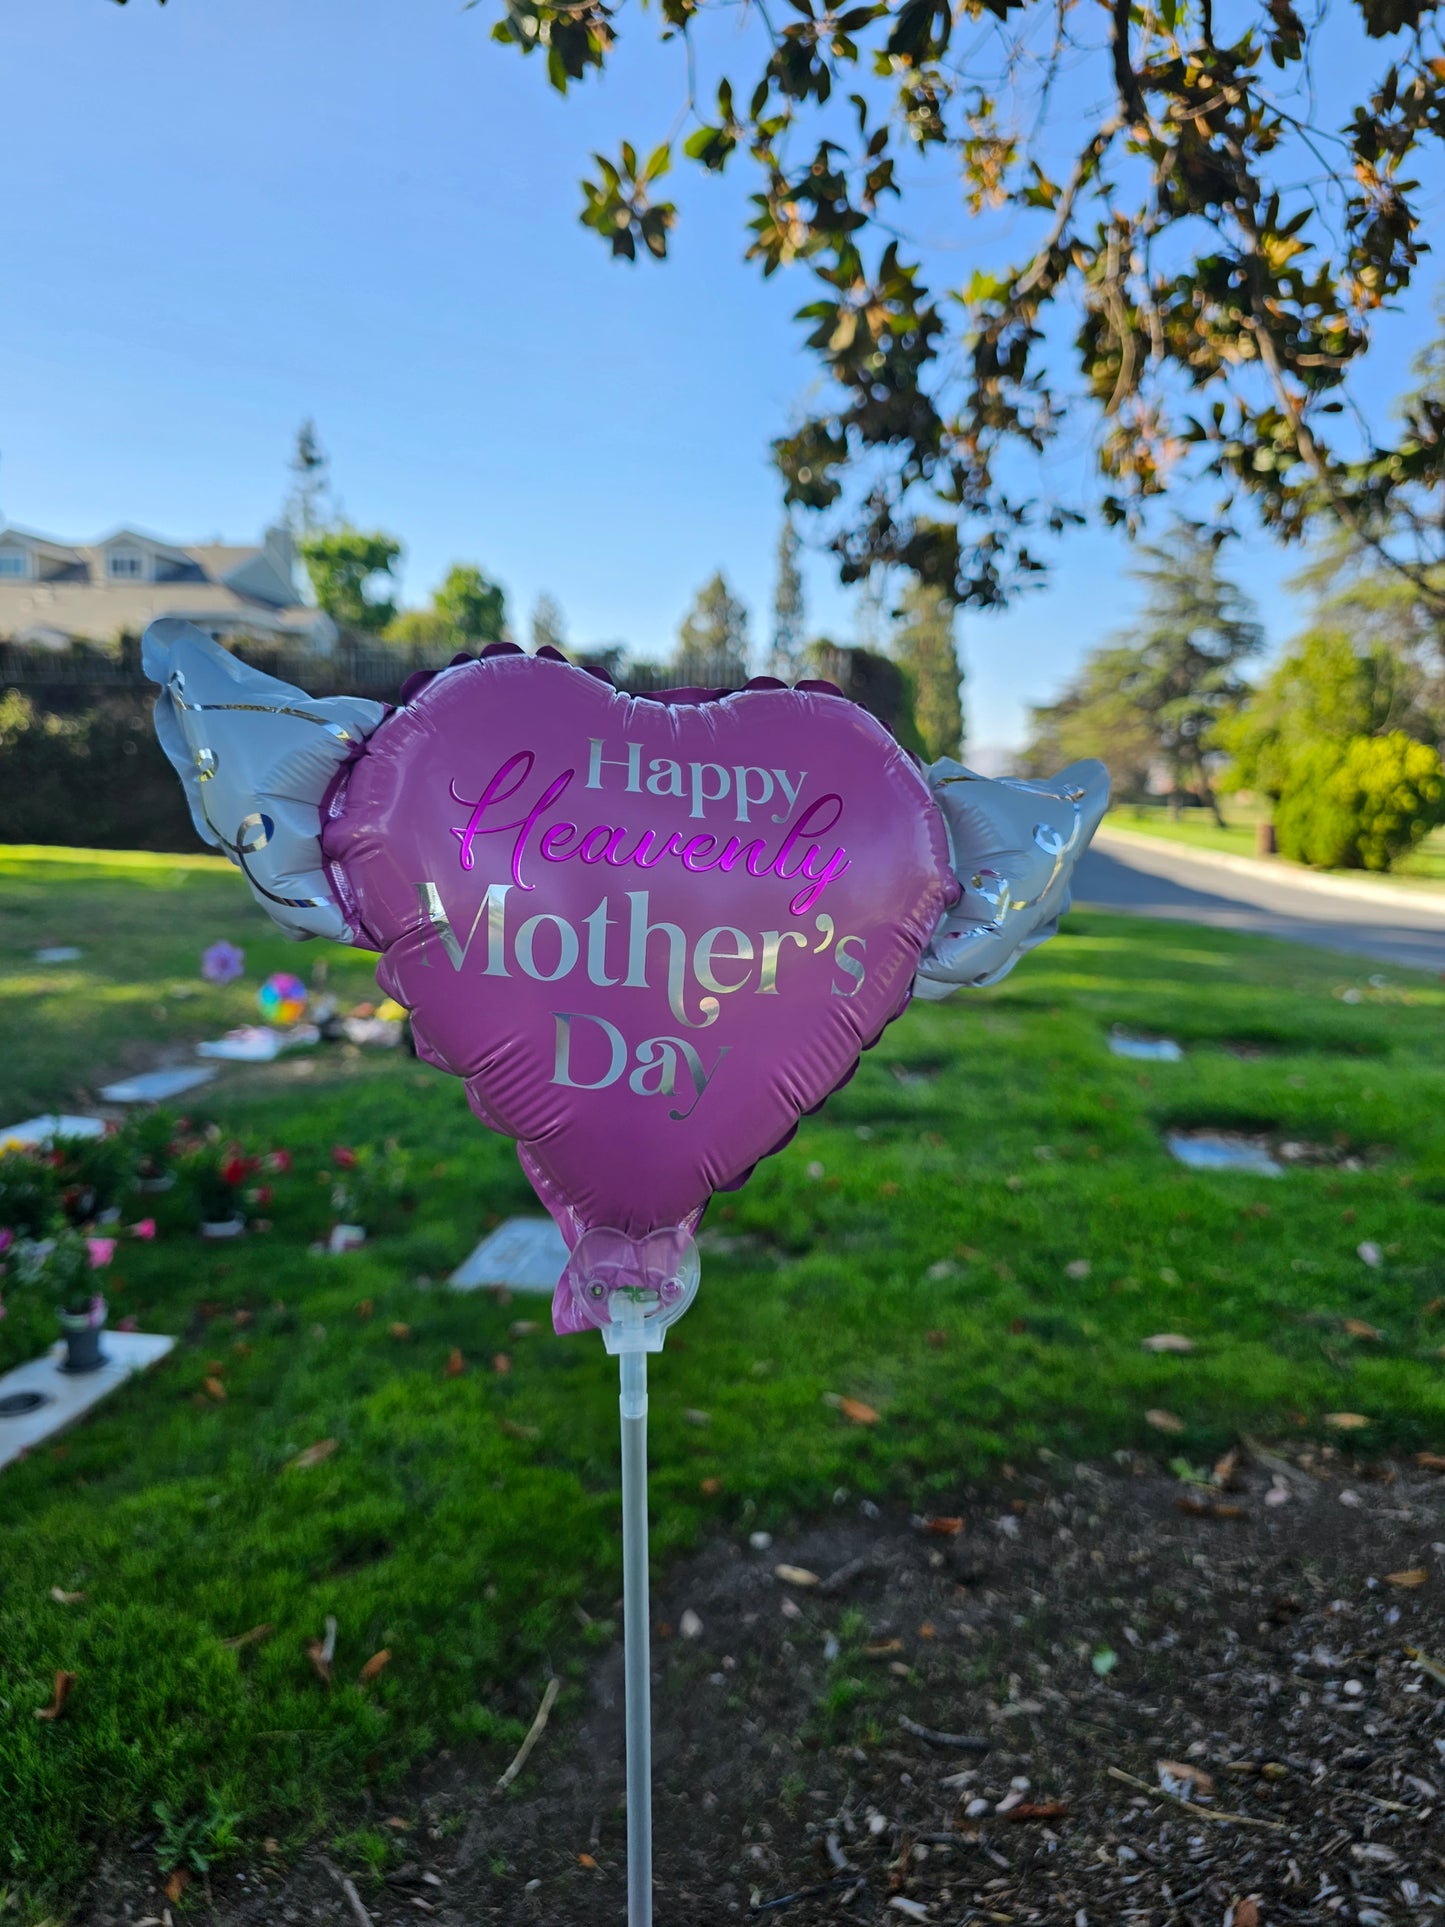 Heavenly Balloons ® on a Stick Happy Heavenly Mother's Day (pink) balloon heart shaped with angel wings